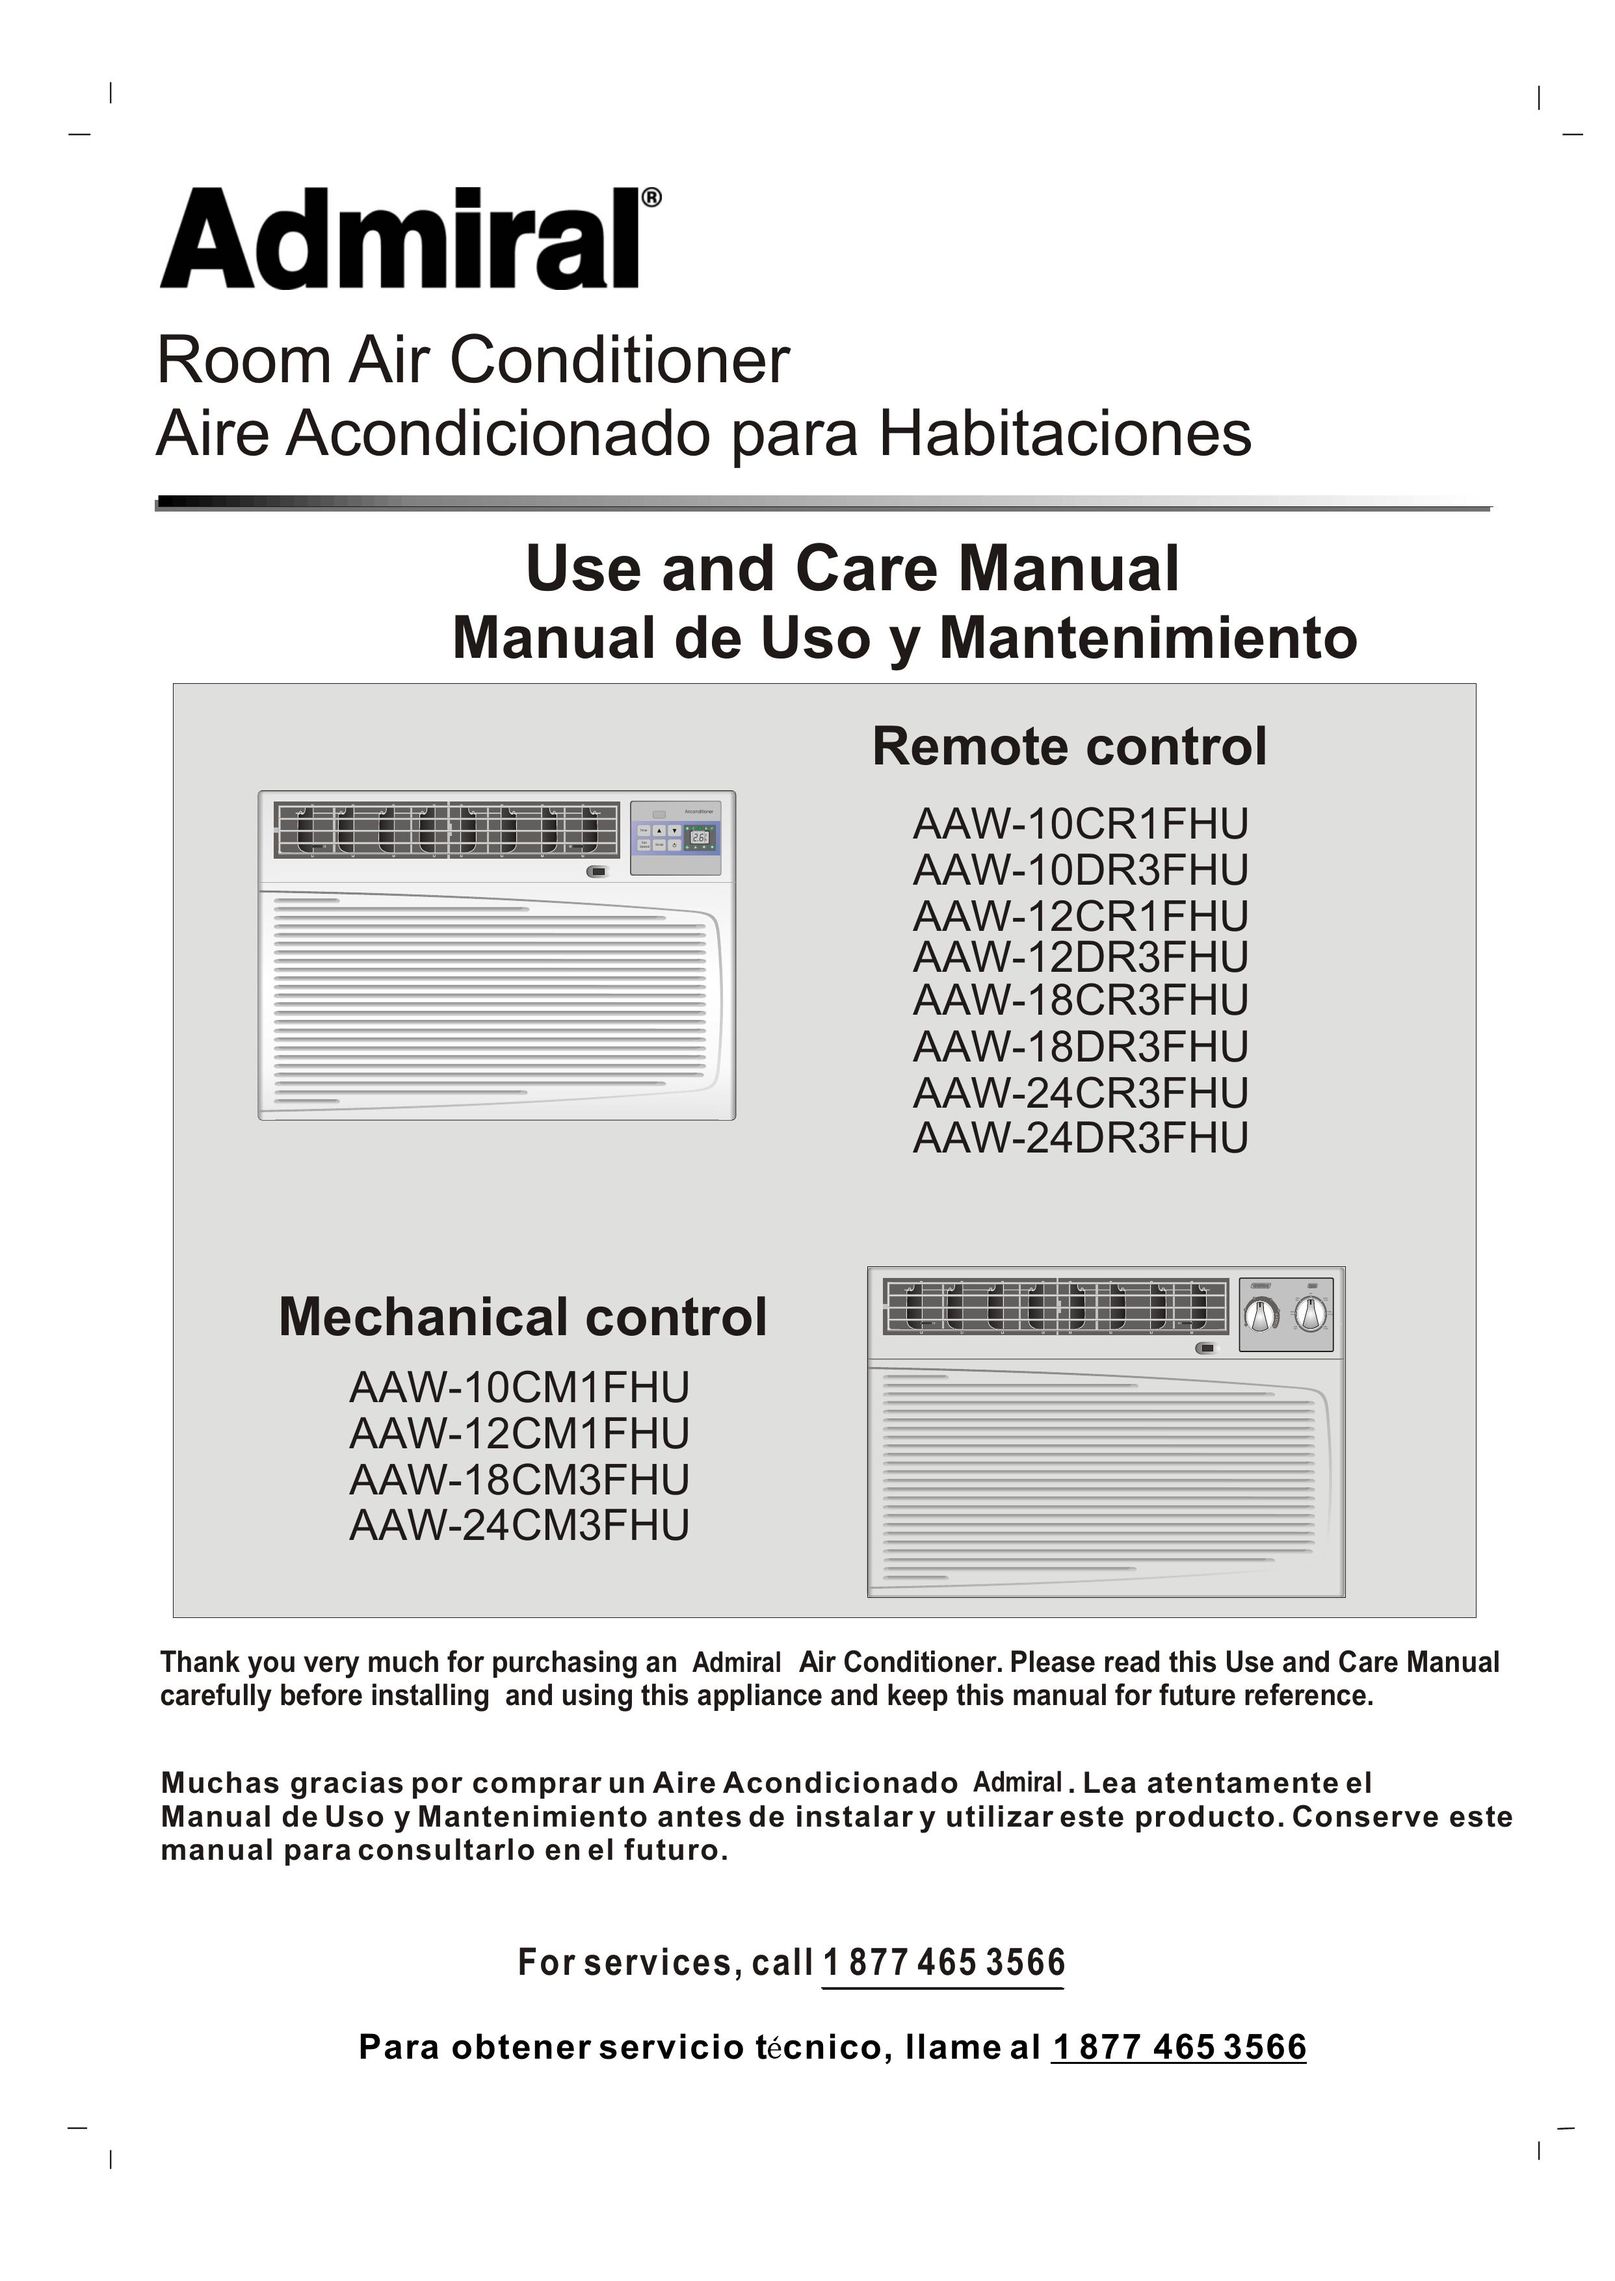 Admiral AAW-18DR3FHU Air Conditioner User Manual